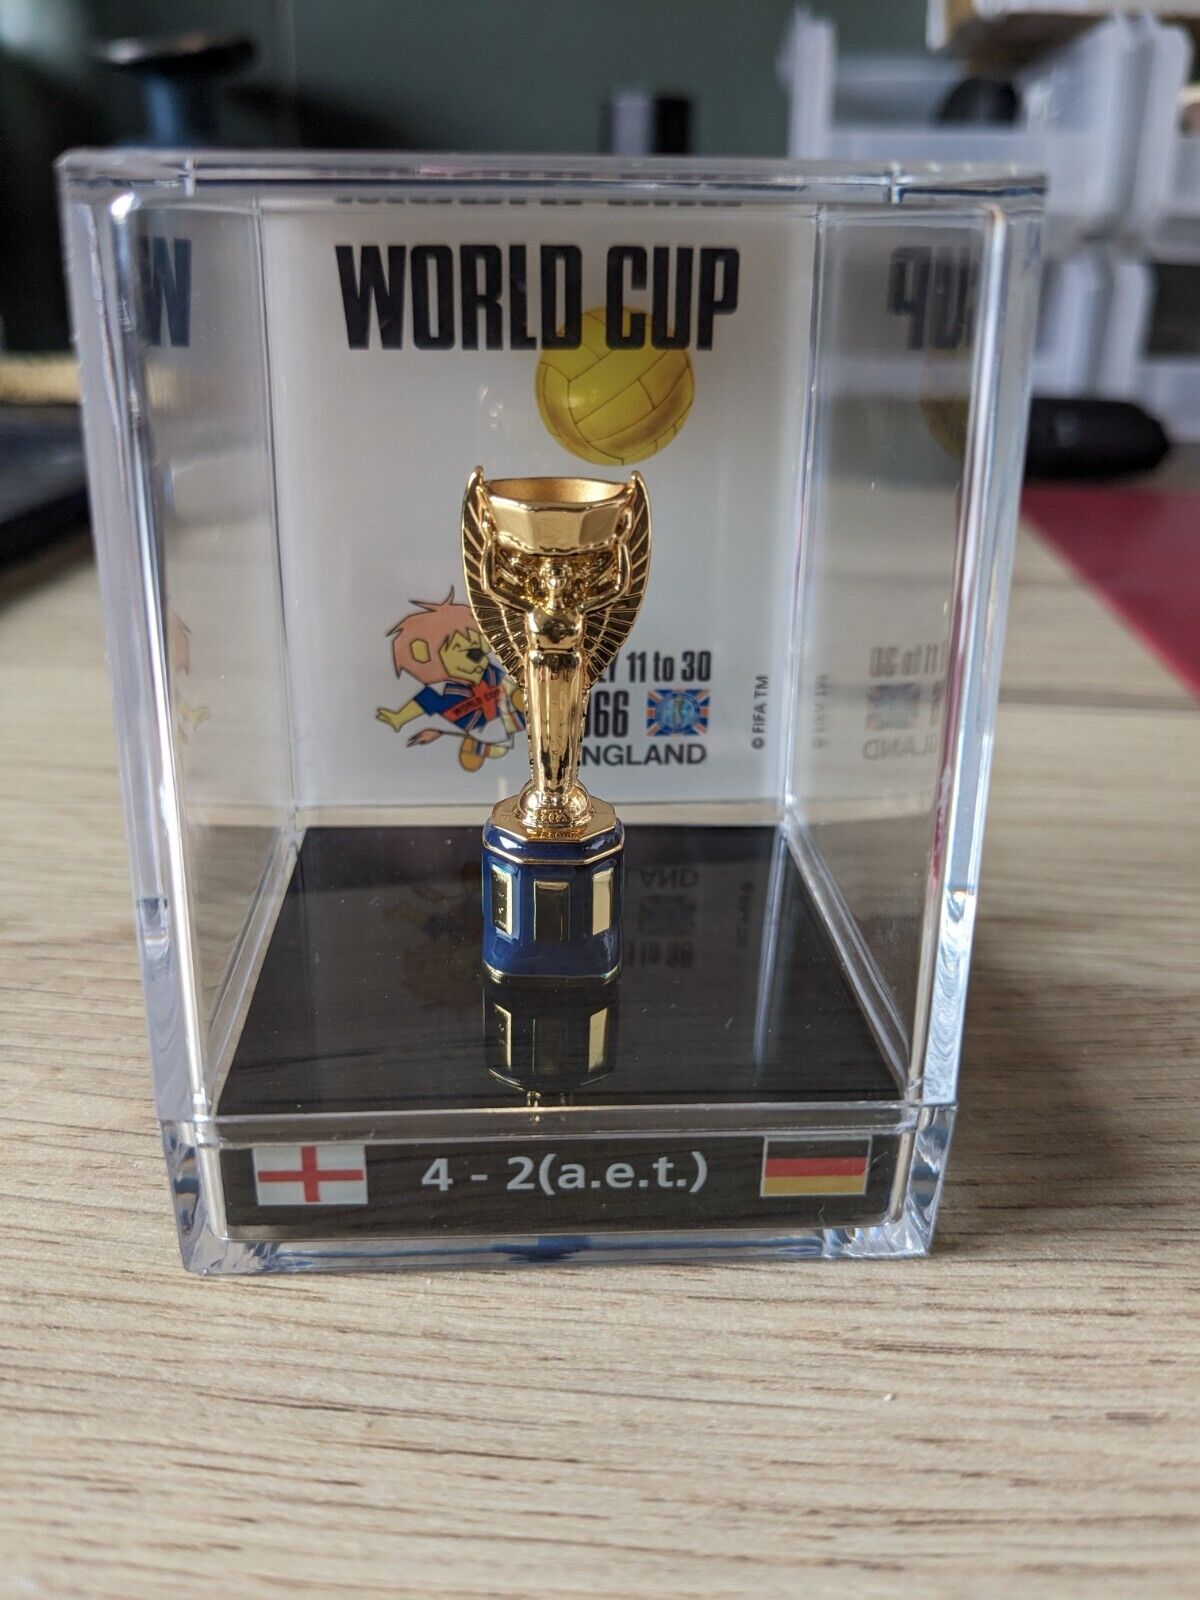 1966 Jules Rimet Trophy England World Cup FIFA, World Cup, World Cup